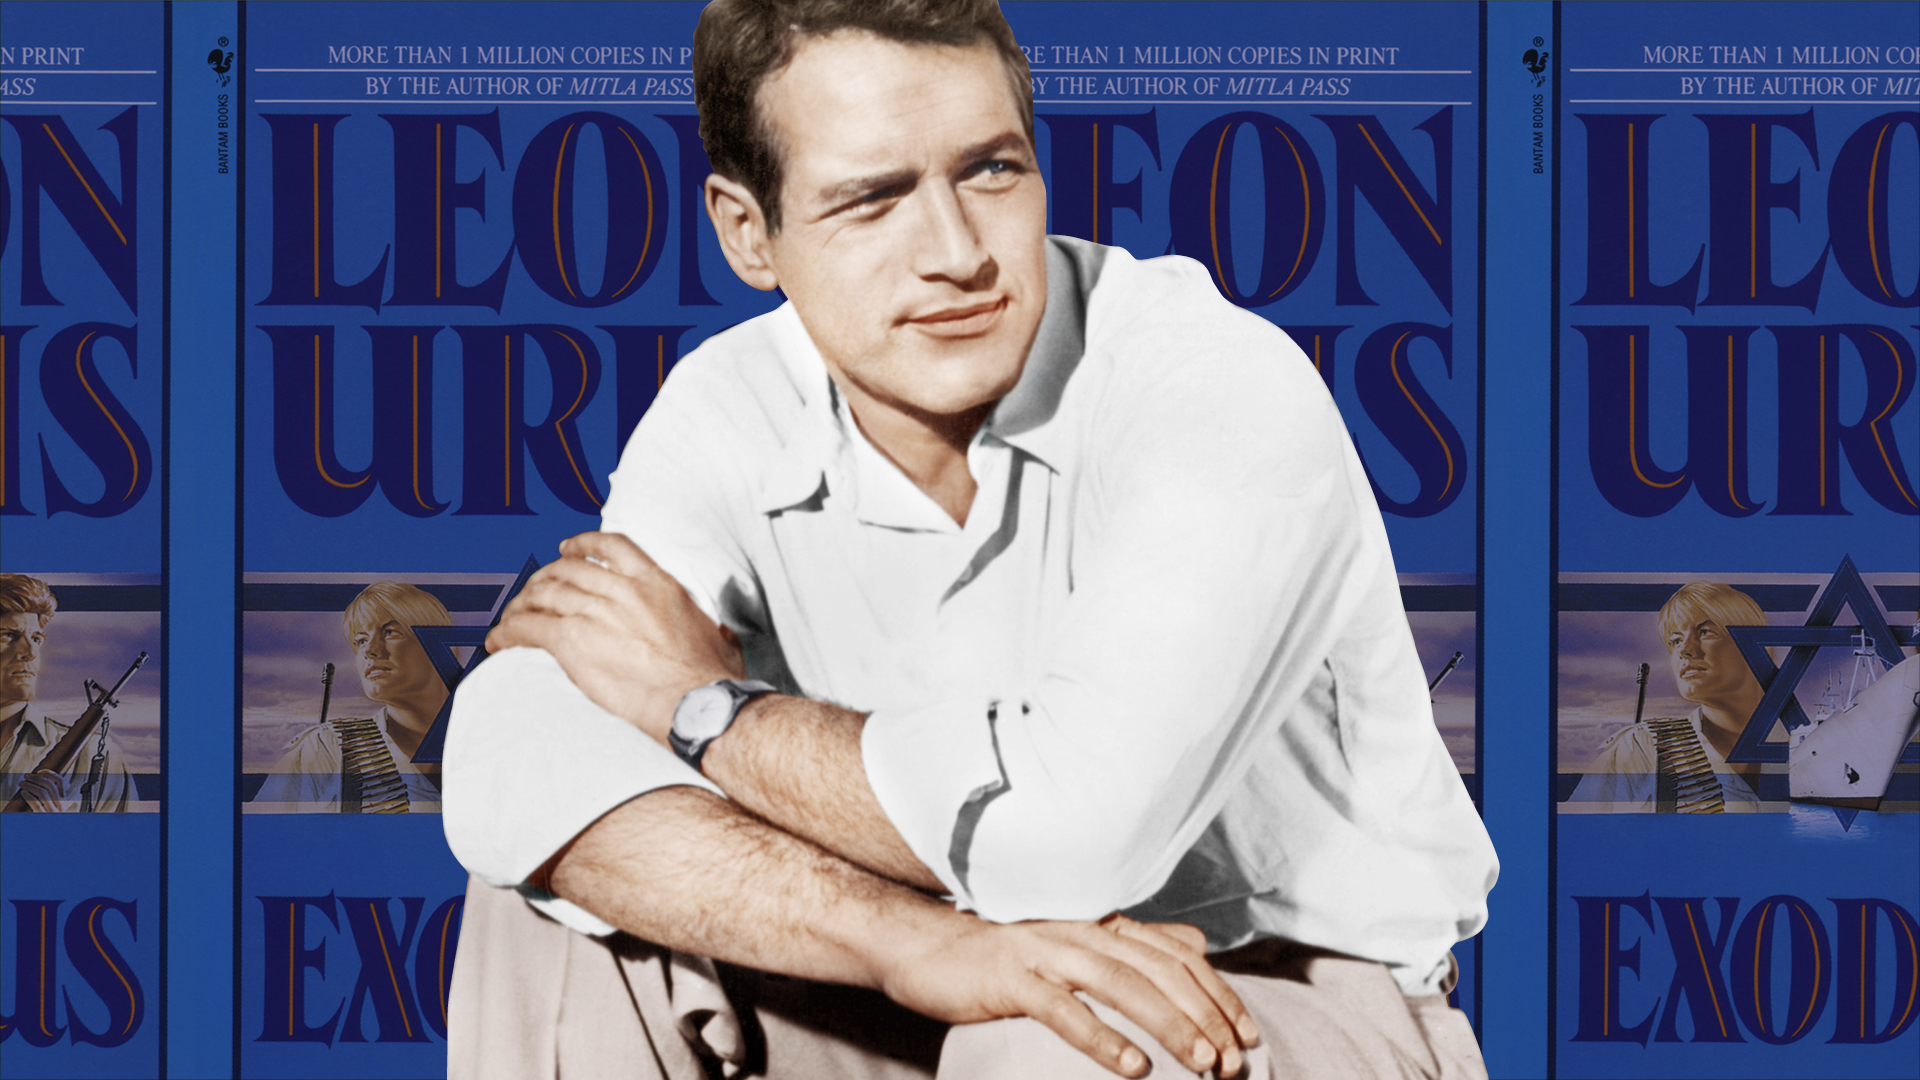 Paul Newman from the 1960 movie Exodus superimposed over the cover of Leon Uris’s novel Exodus repeating in the background.